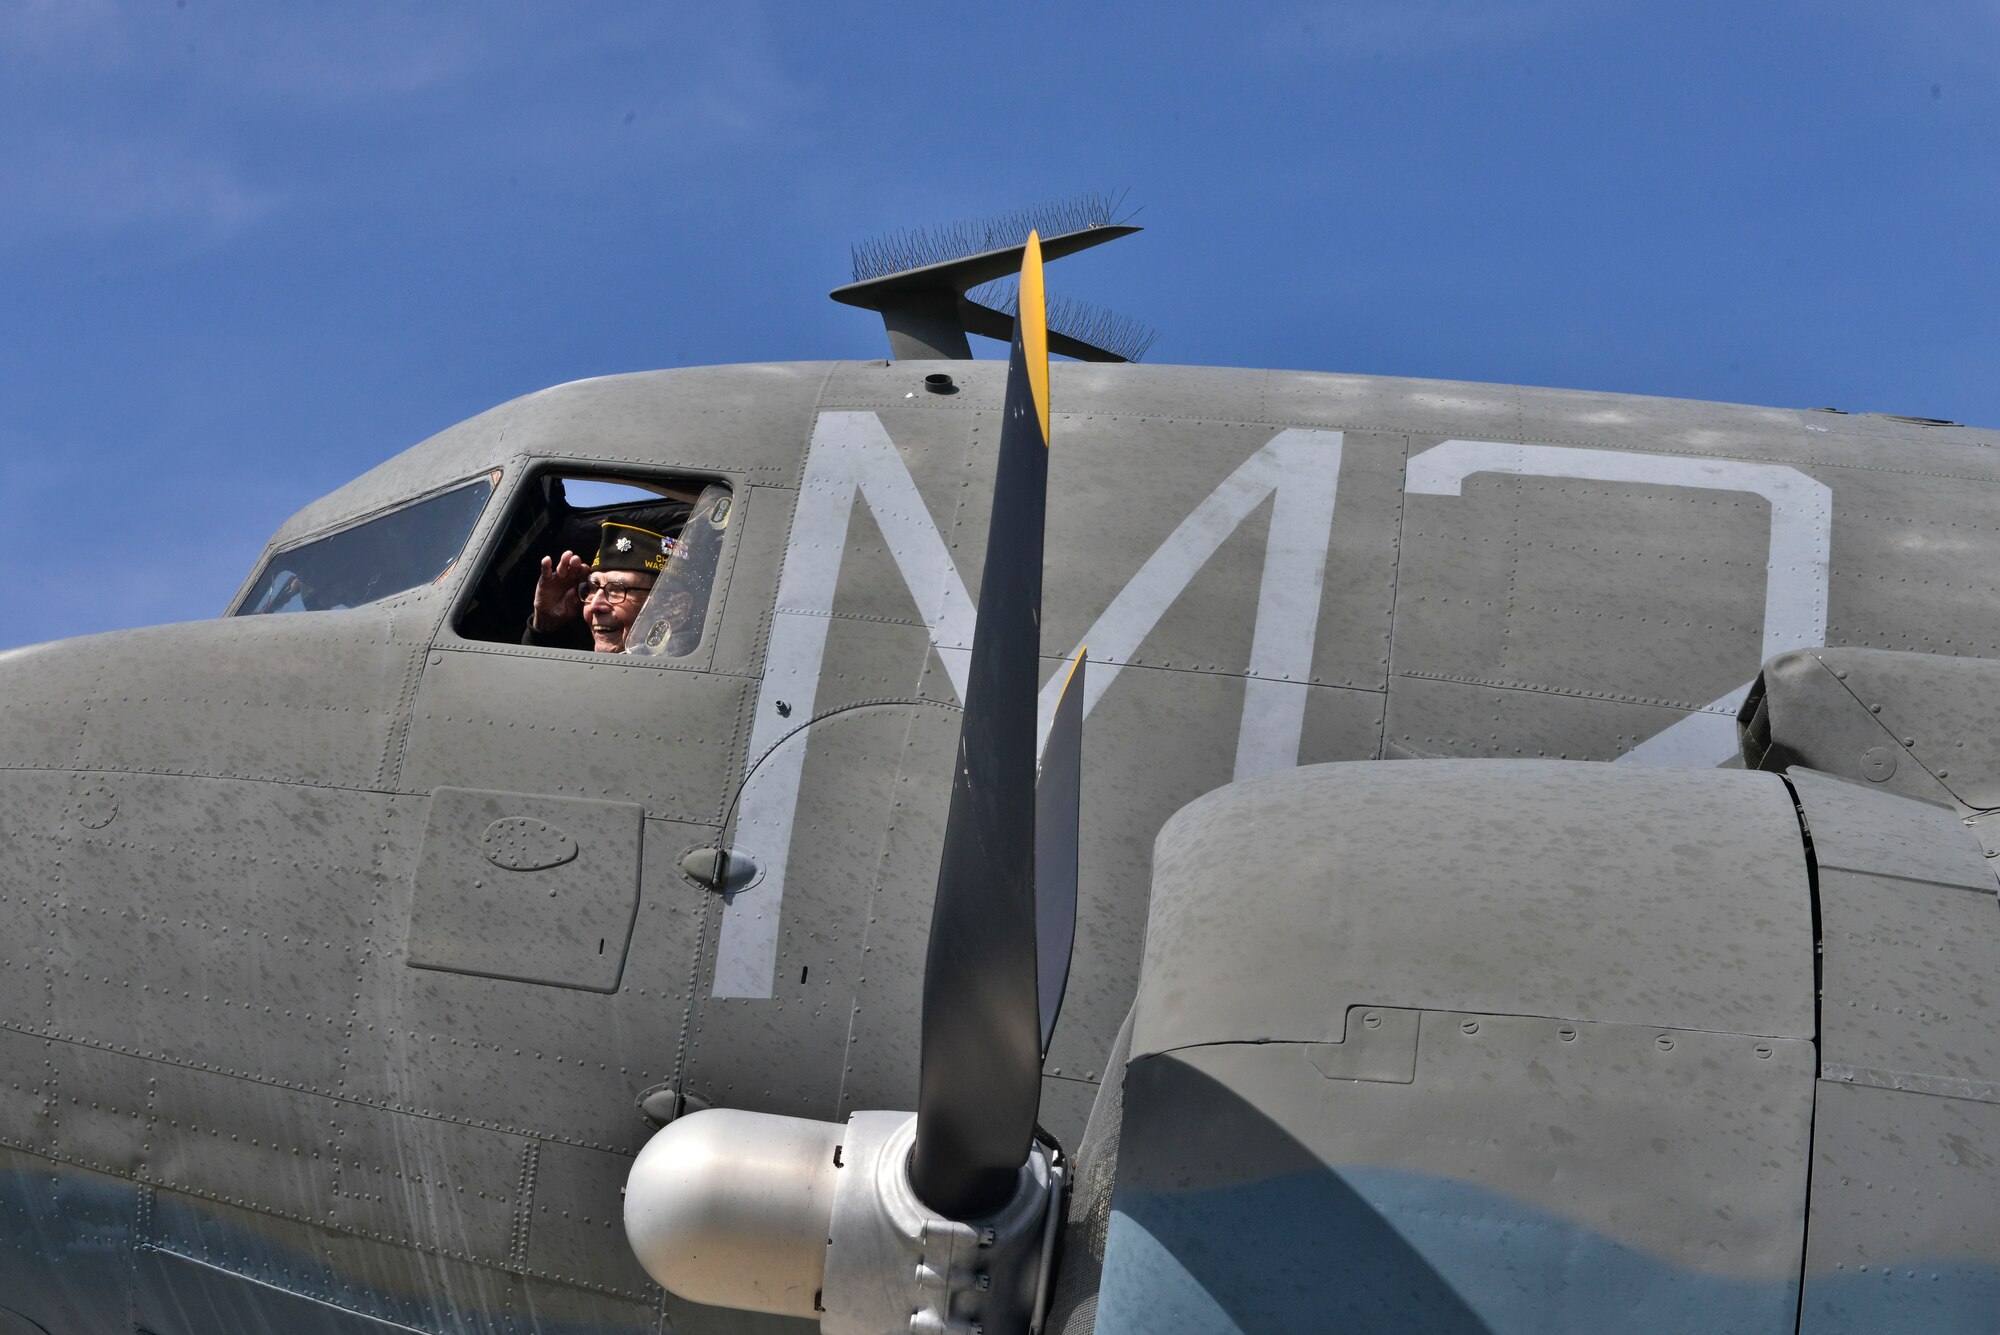 Retired U.S. Air Force Lt. Col. Alston Daniels salutes out of the window of a C-47D Skytrain on static display at Fairchild AFB, Wash. April 7, 2015. Daniels flew the C-47 during World War II and logged nearly 2,000 hours in the aircraft. (U.S. Air Force photo/Staff Sgt. Alex Montes)